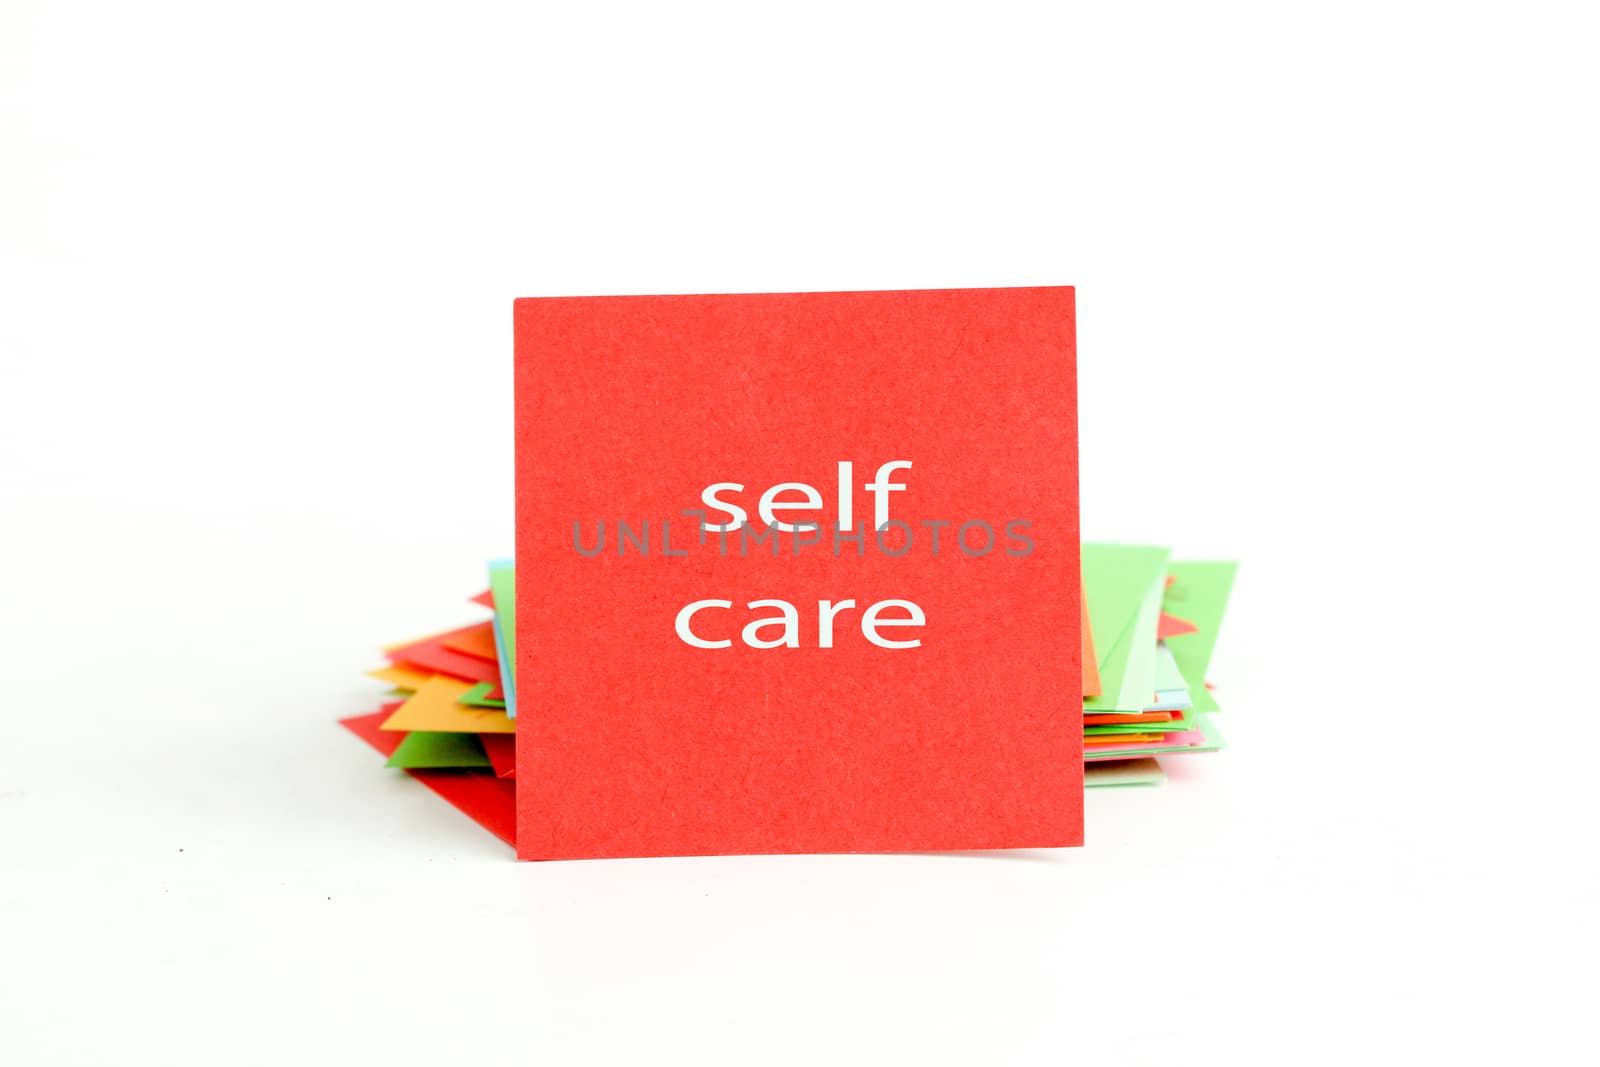 picture of a red note paper with text self care